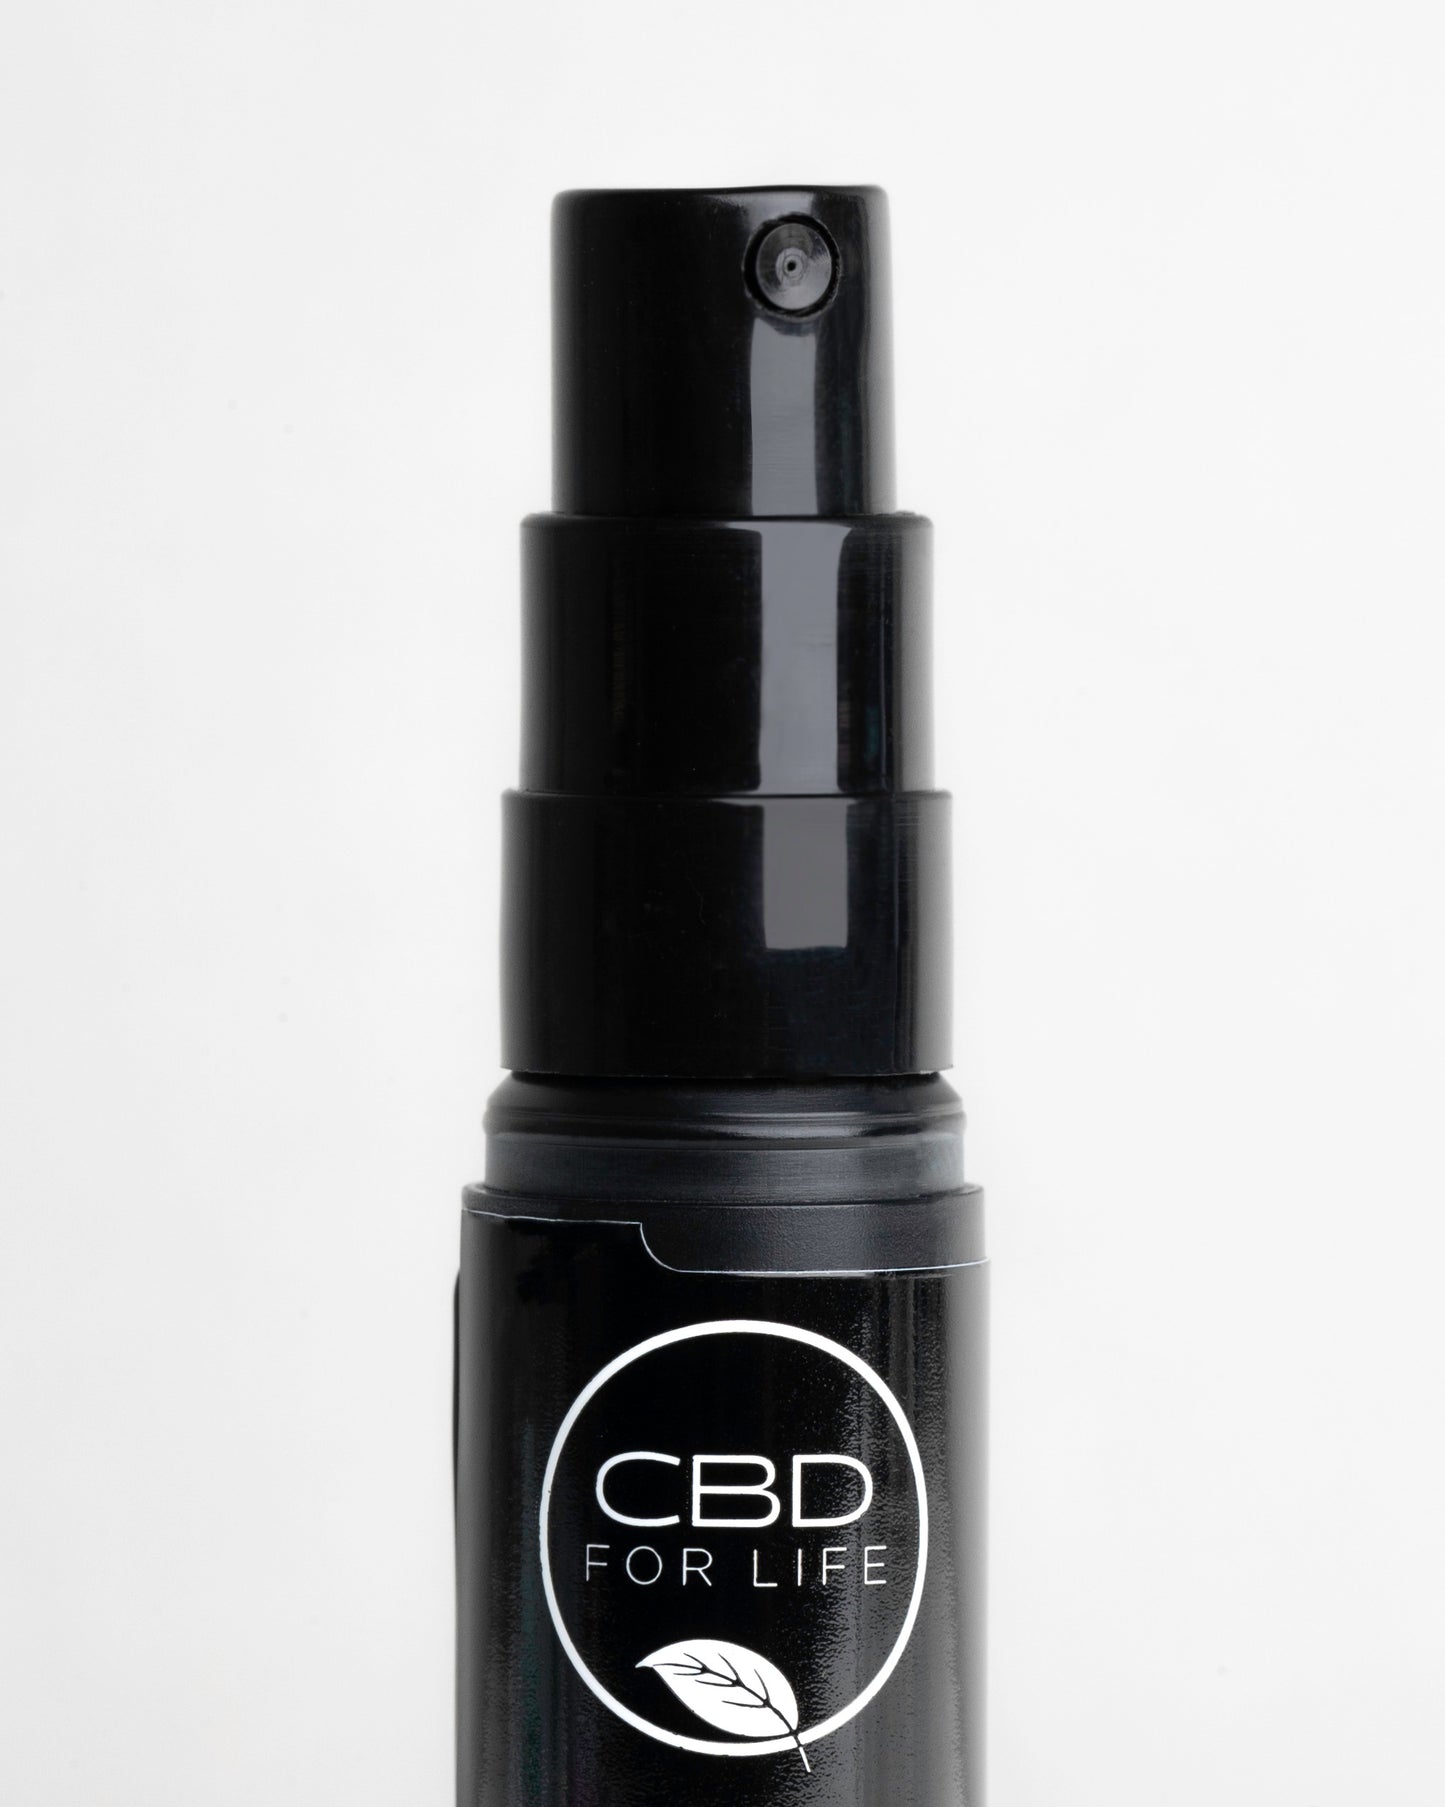 Fast absorbing and fast acting, our CBD Oral Spray is the easiest and most convenient intake—just pump it under your tongue. Keep a CBD Spray in your desk drawer, bedside table or handbag for a quick spray when you need it most.